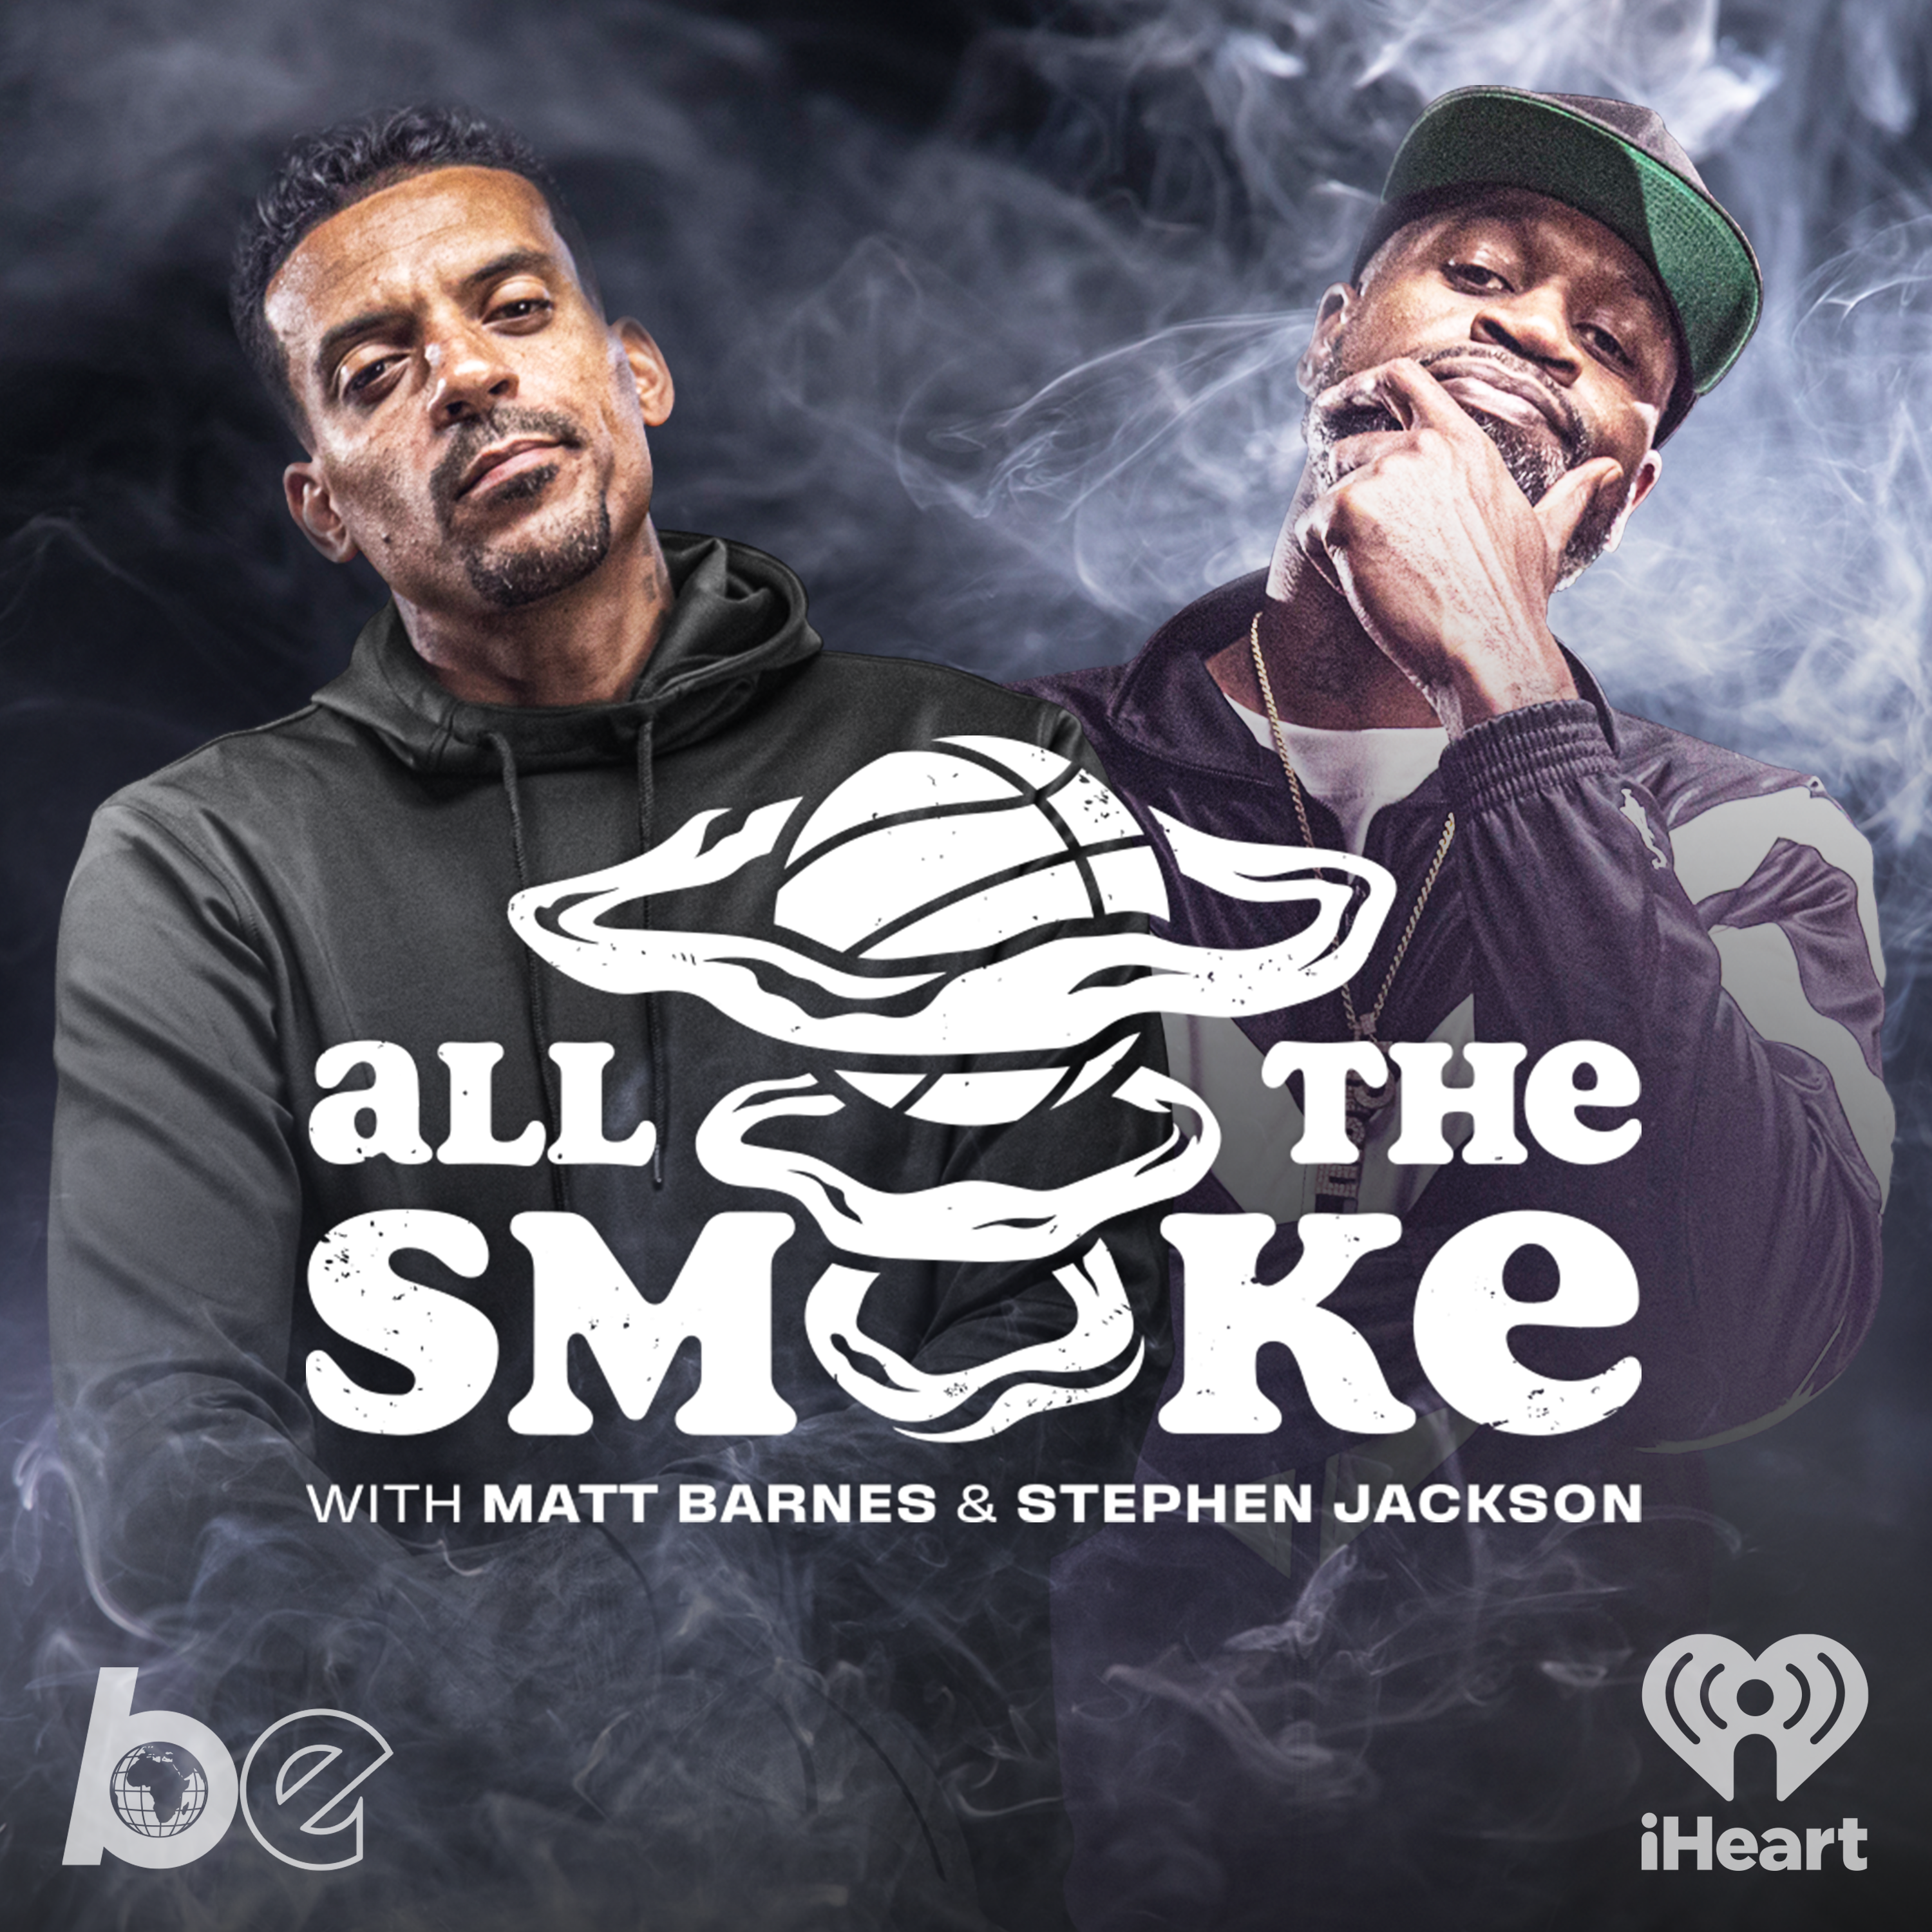 Gary Payton | Ep 29 | ALL THE SMOKE Full Episode | #StayHome with SHOWTIME Basketball